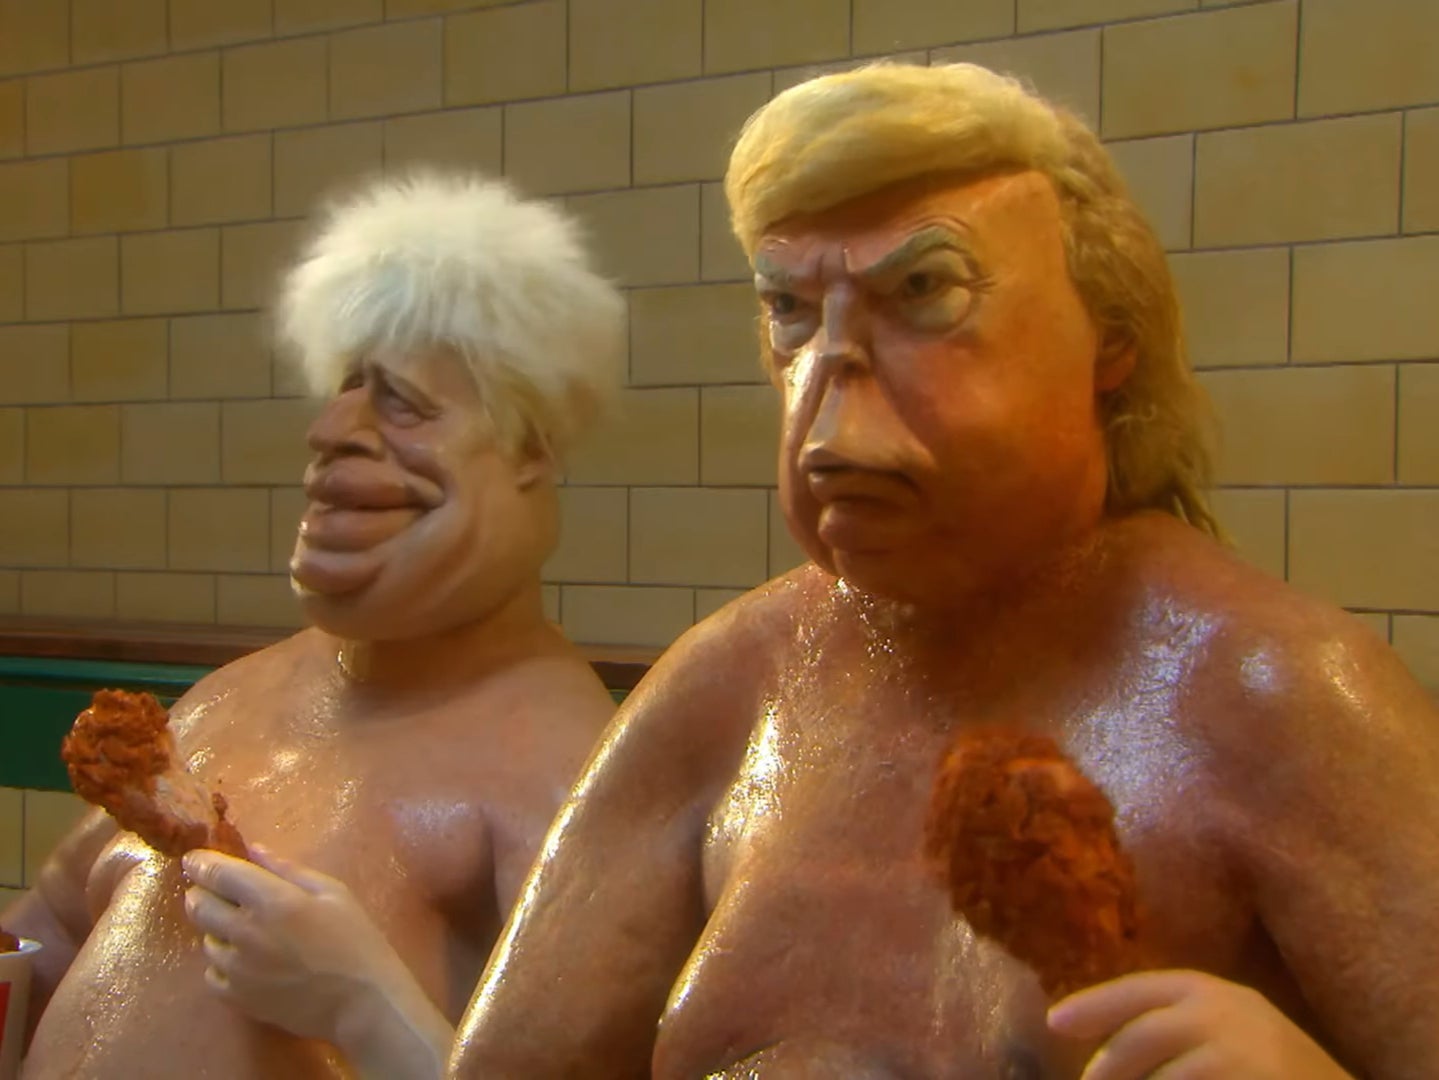 Puppets representing Donald Trump and Boris Johnson are depicted eating fried chicken in a sauna